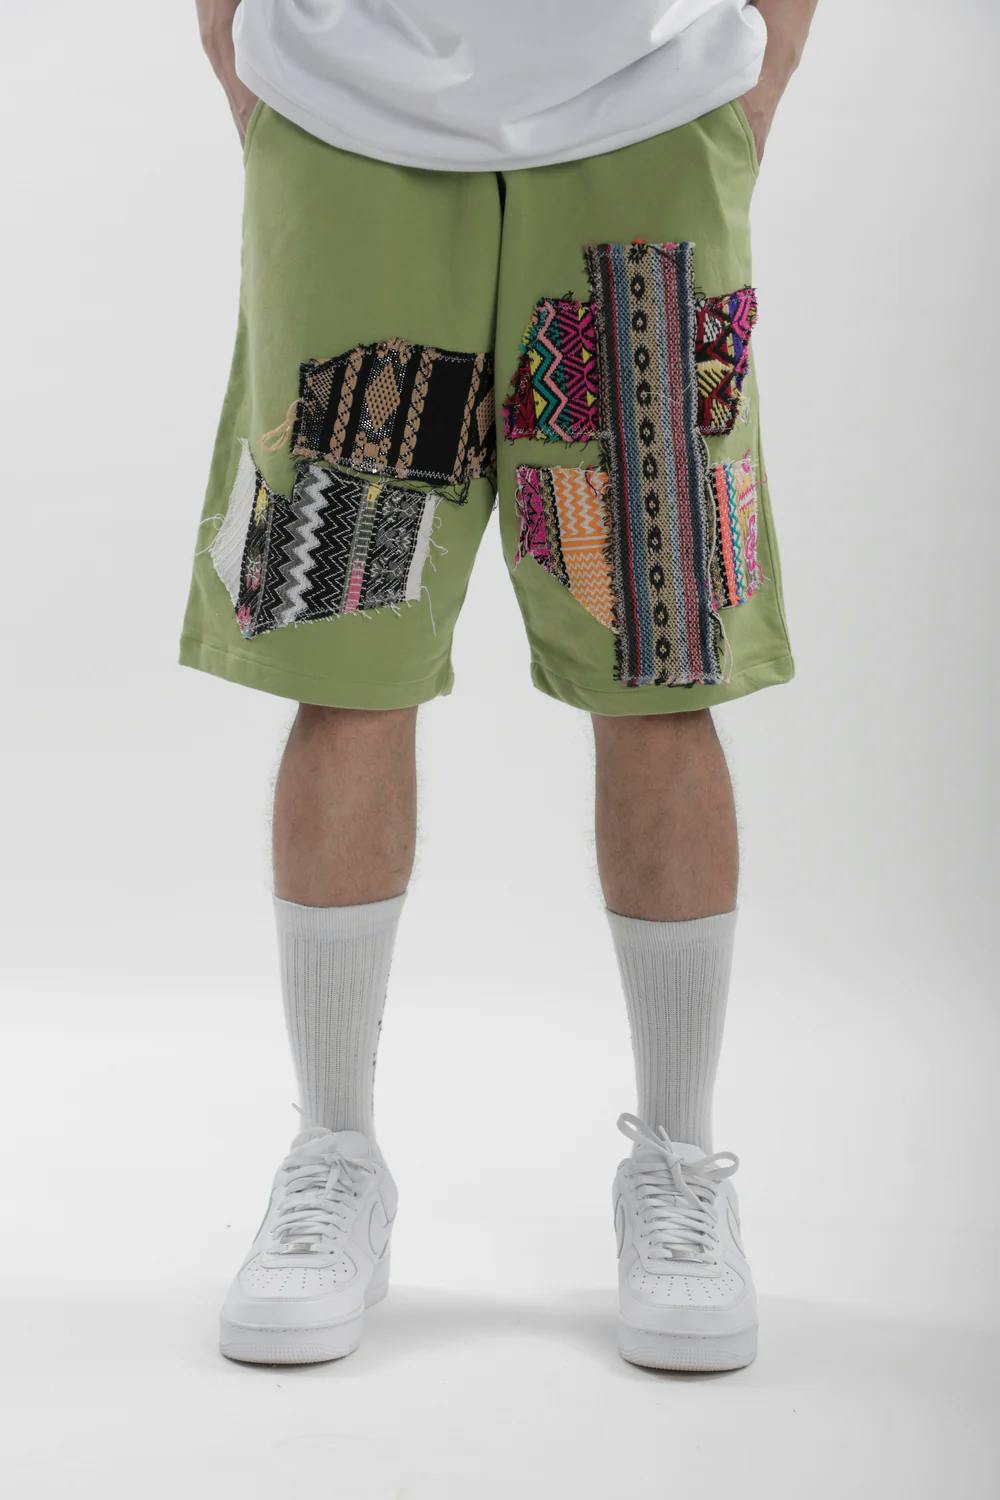 Artistic Stitched Shorts, a product by TOFFLE